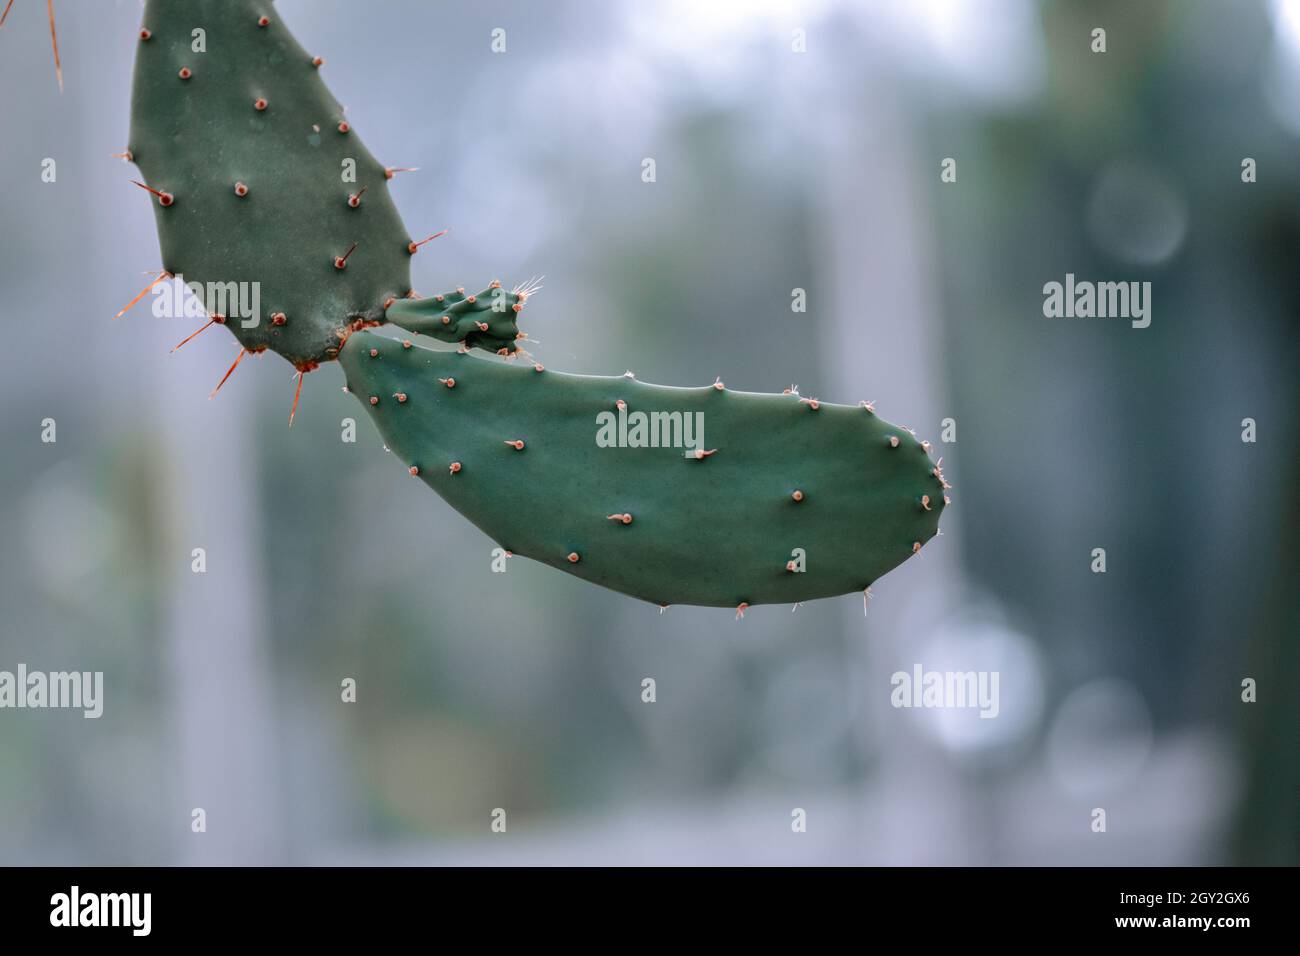 Pads of Indian fig opunita in the blurred background Stock Photo